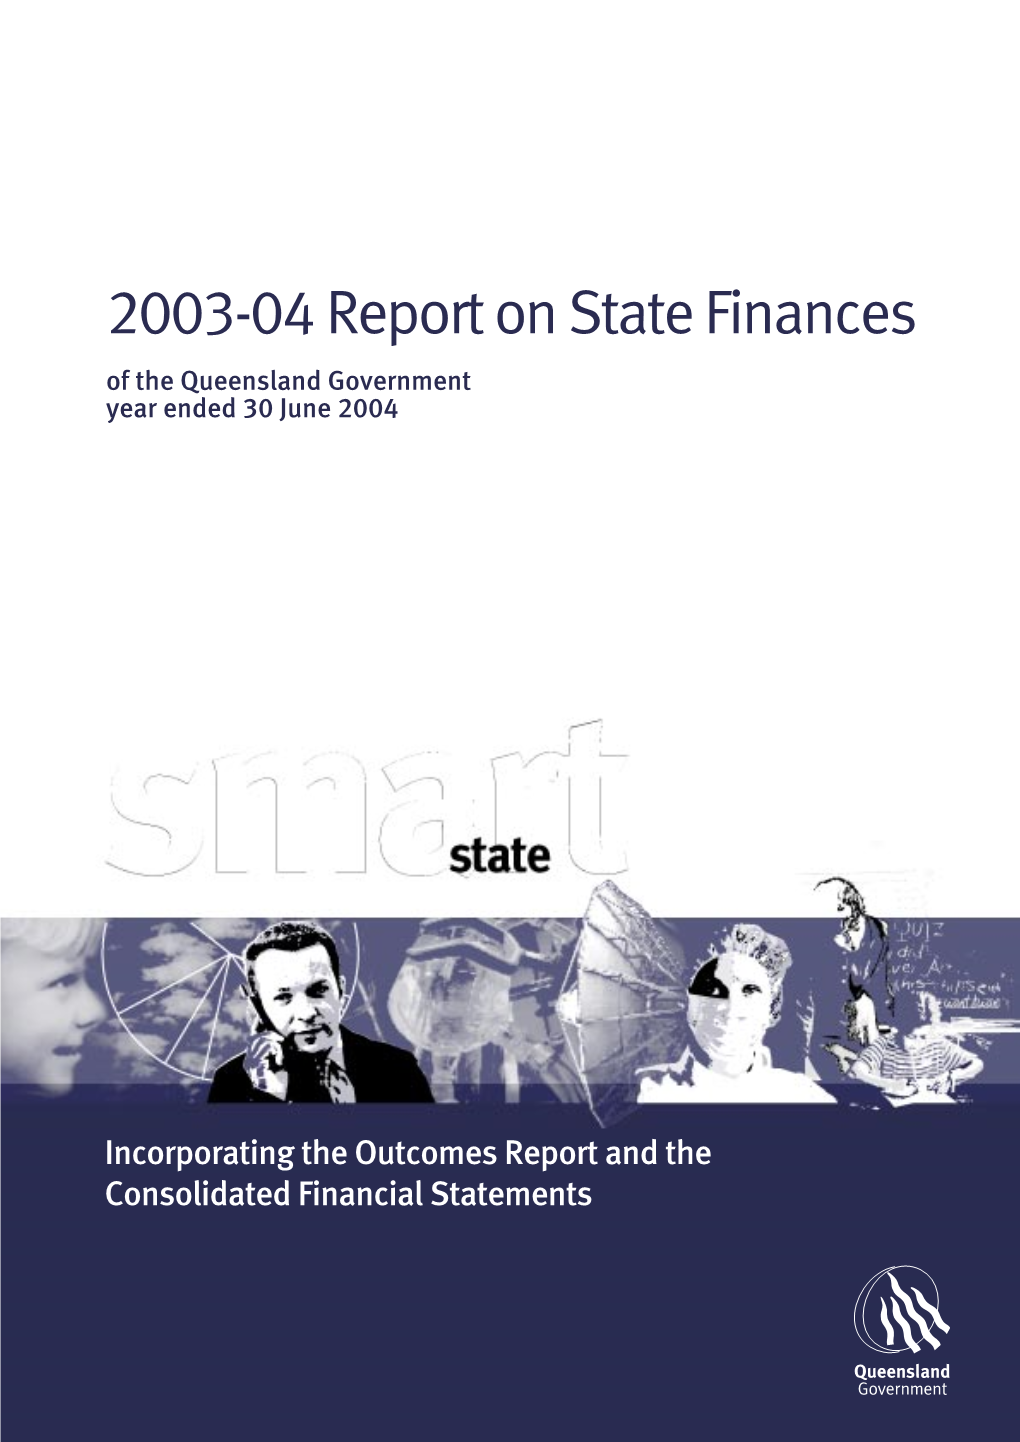 Report on State Finances 2003-04 – Government of Queensland 1